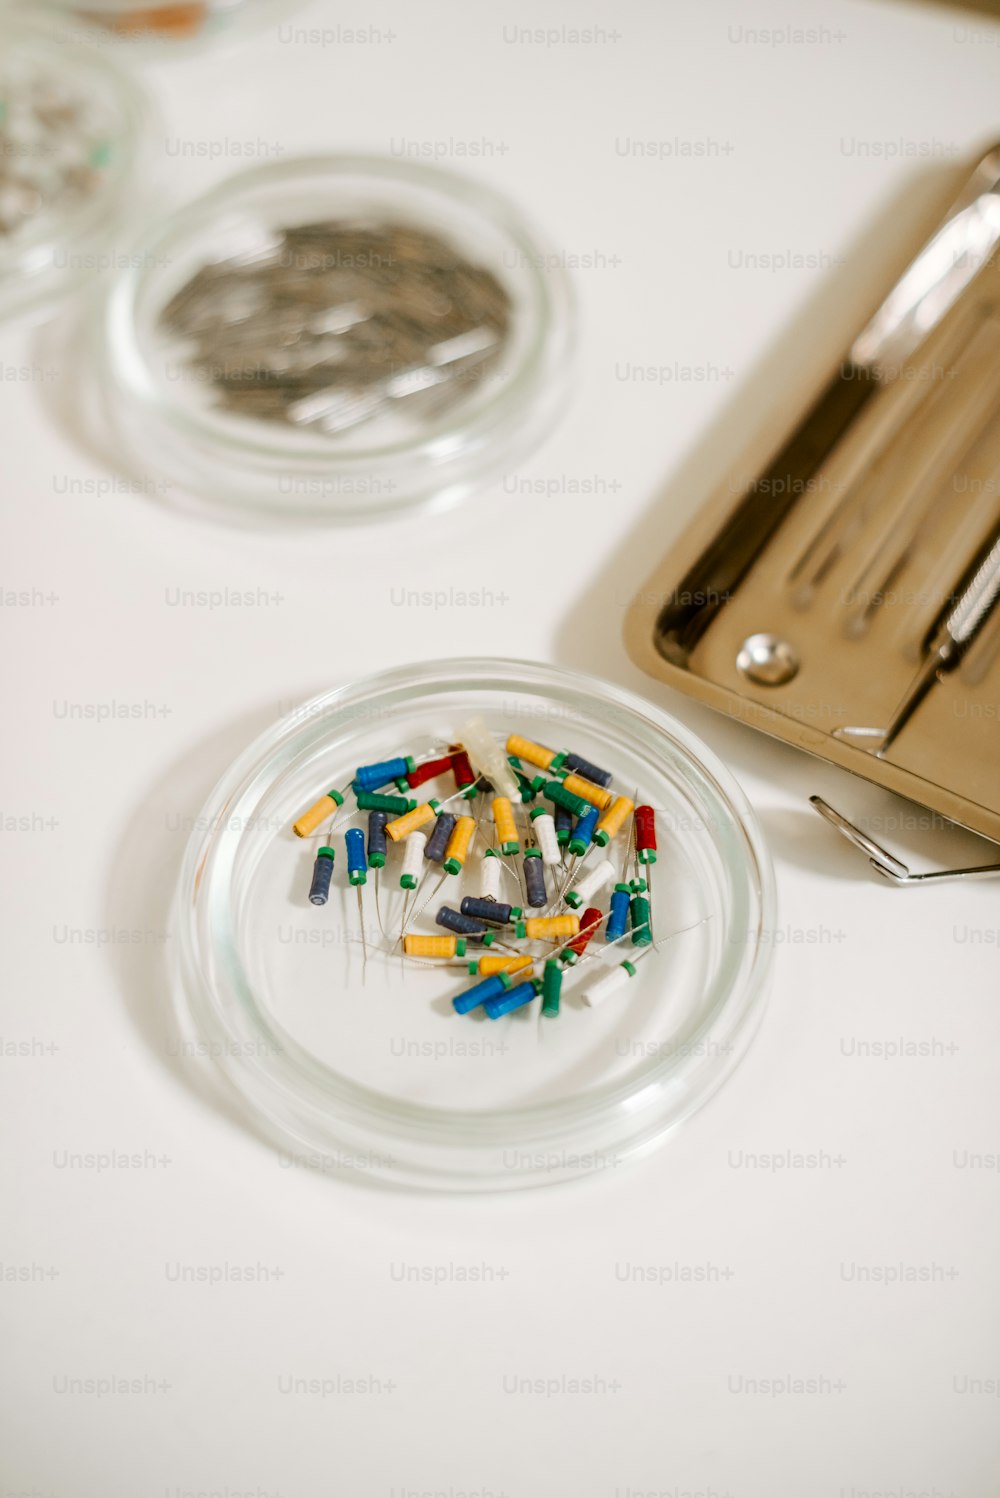 a glass plate with legos on top of it